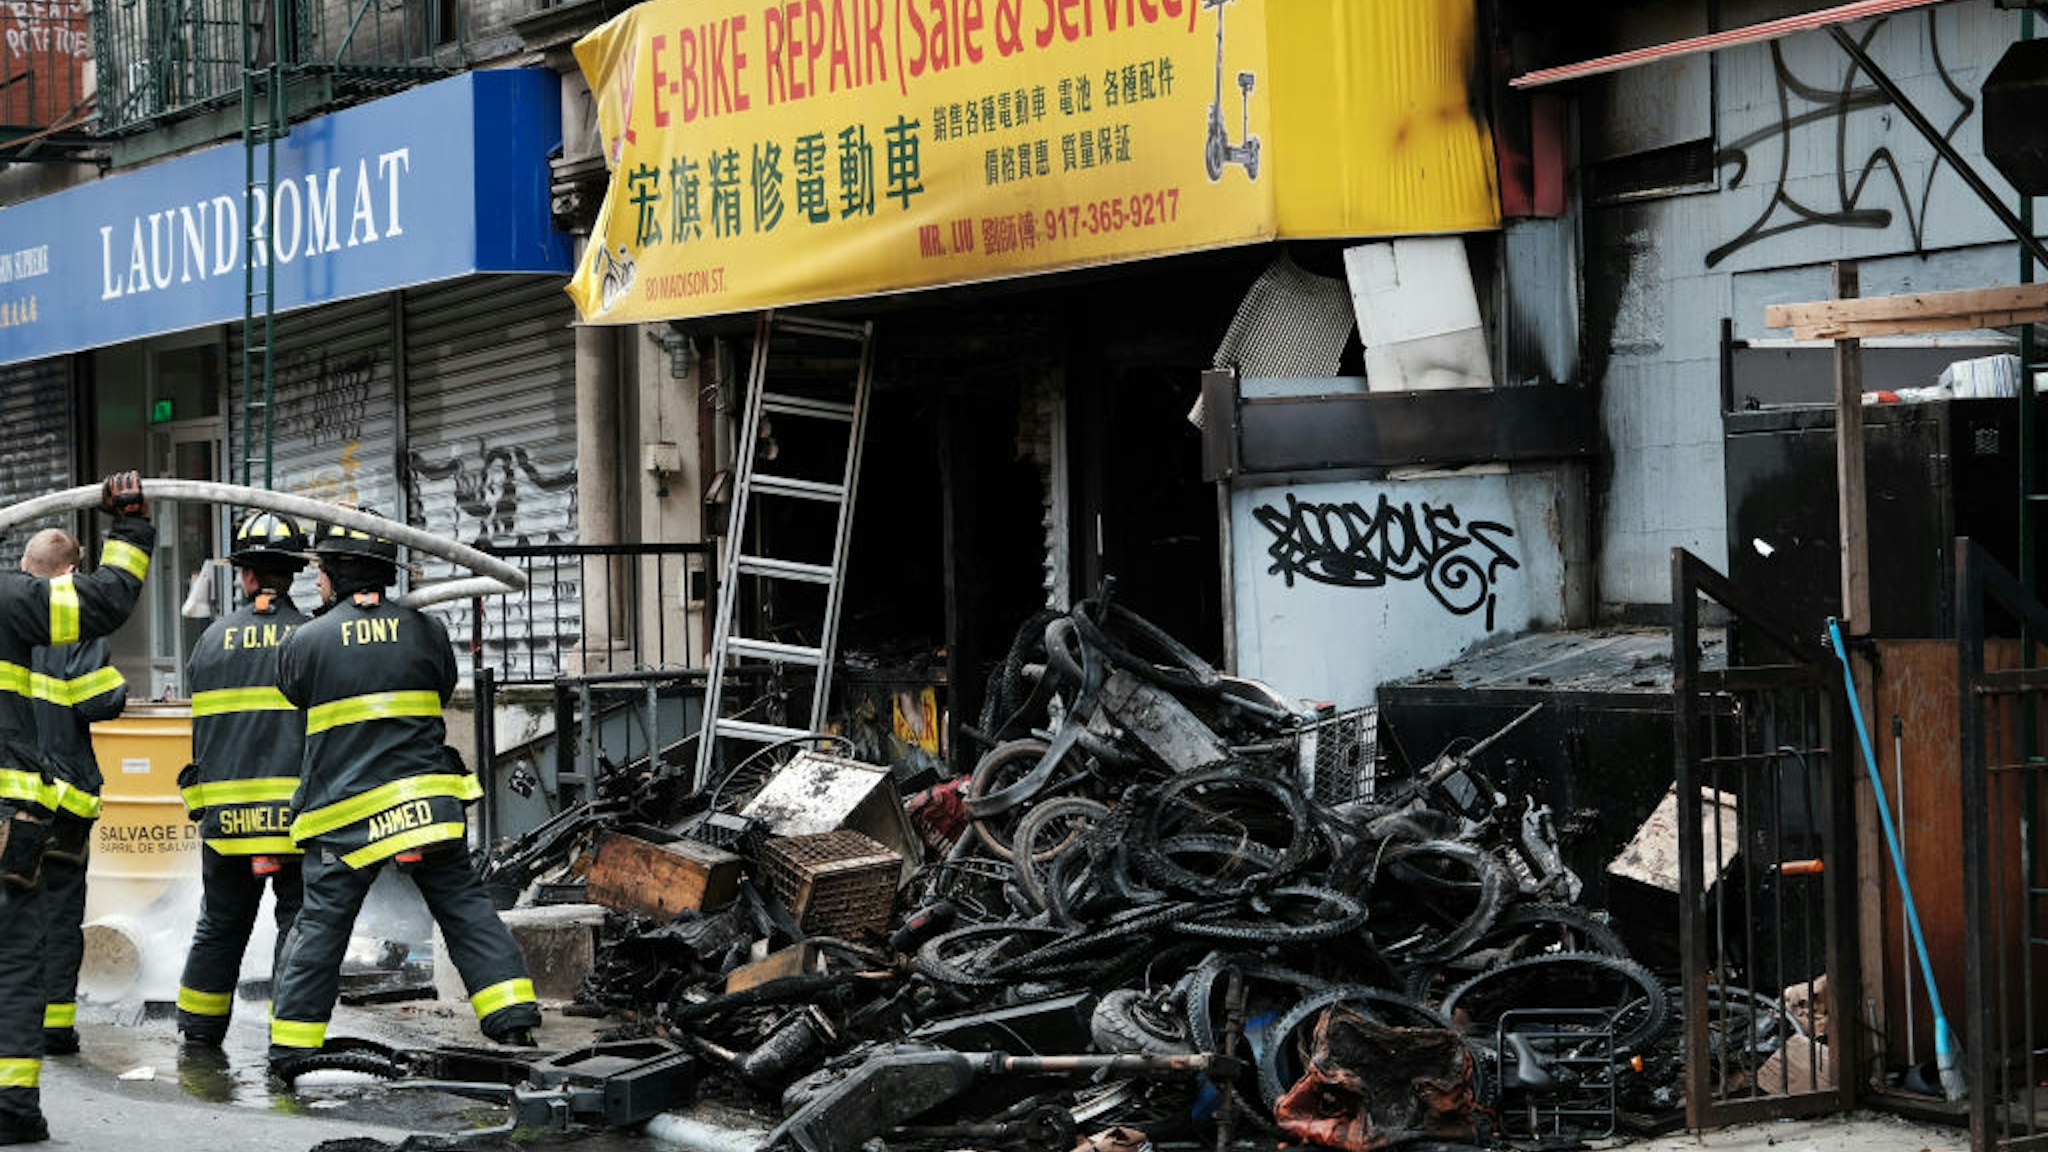 NEW YORK, NEW YORK - JUNE 20: Firefighters work outside a building in Chinatown after four people were killed by a fire in an e-bike repair shop overnight on June 20, 2023 in New York City. Lithium-ion e-bike batteries have caused numerous fires and fatalities in recent years due to the rising popularity of e-bikes for delivery purposes. New York City Mayor Eric Adams' administration has taken strong measures against unregulated e-bike and e-scooter batteries, which often present the highest risk when improperly charged.